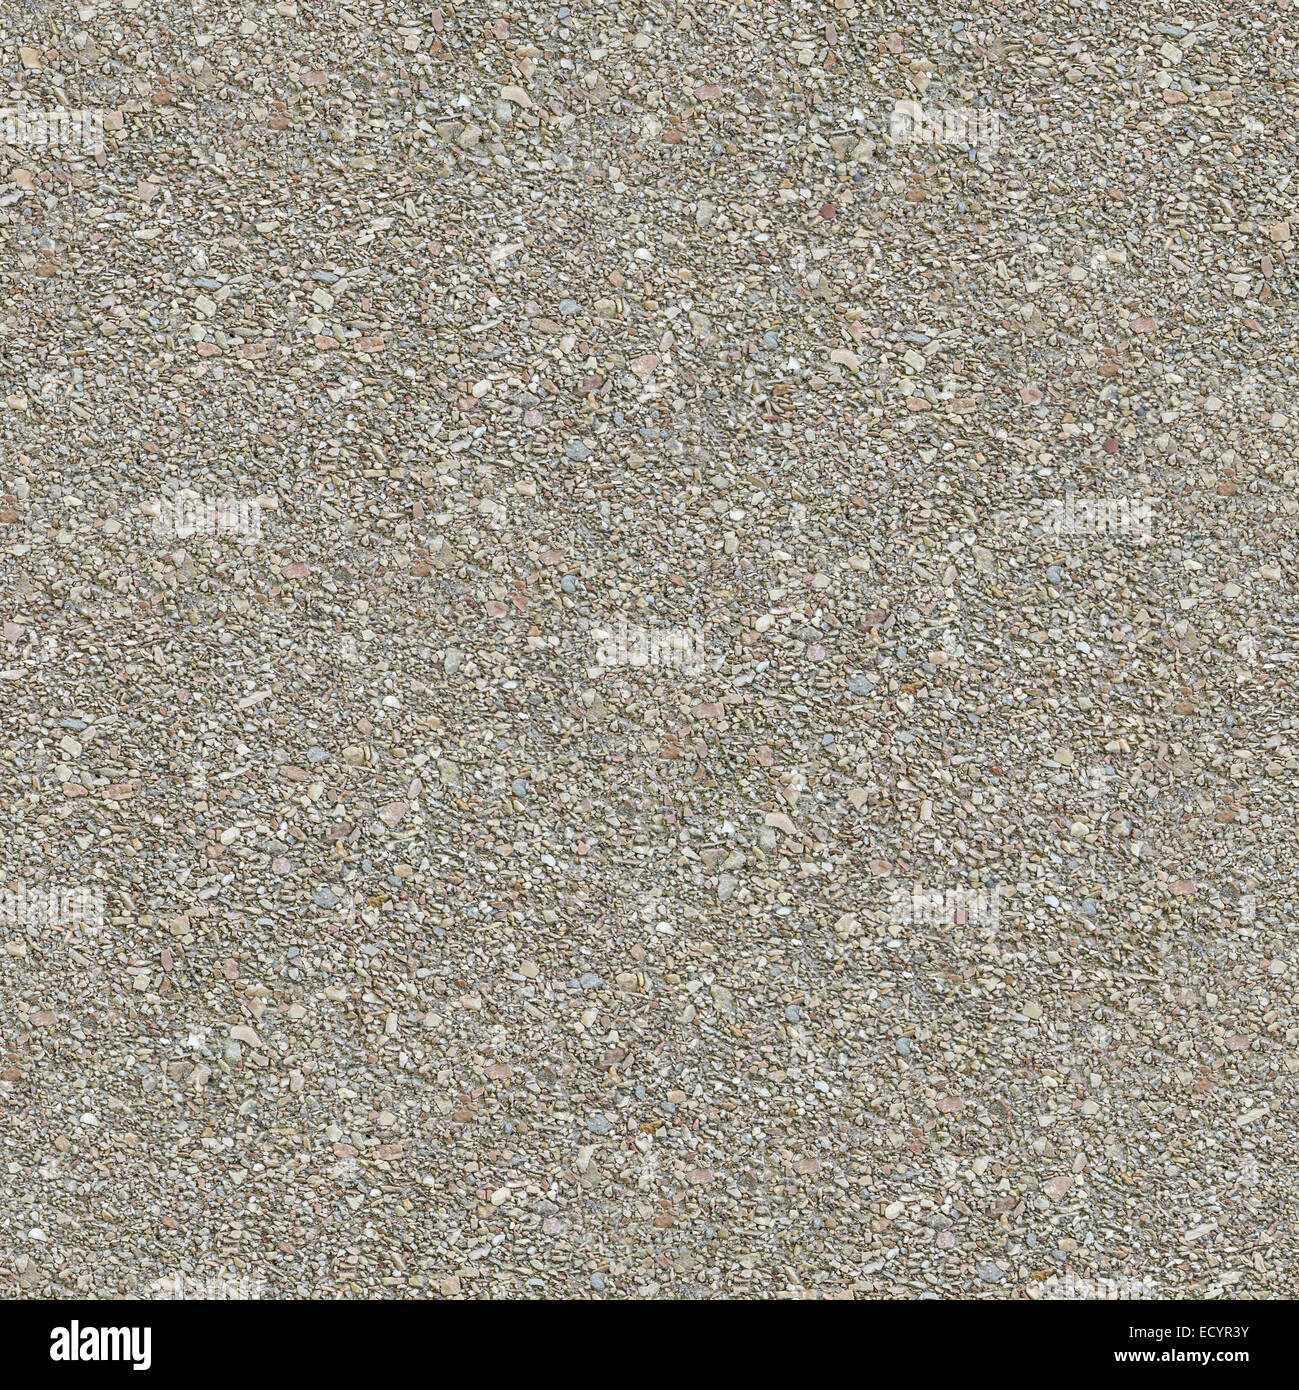 Concrete Surface is Covered with Fine Gravel. Stock Photo